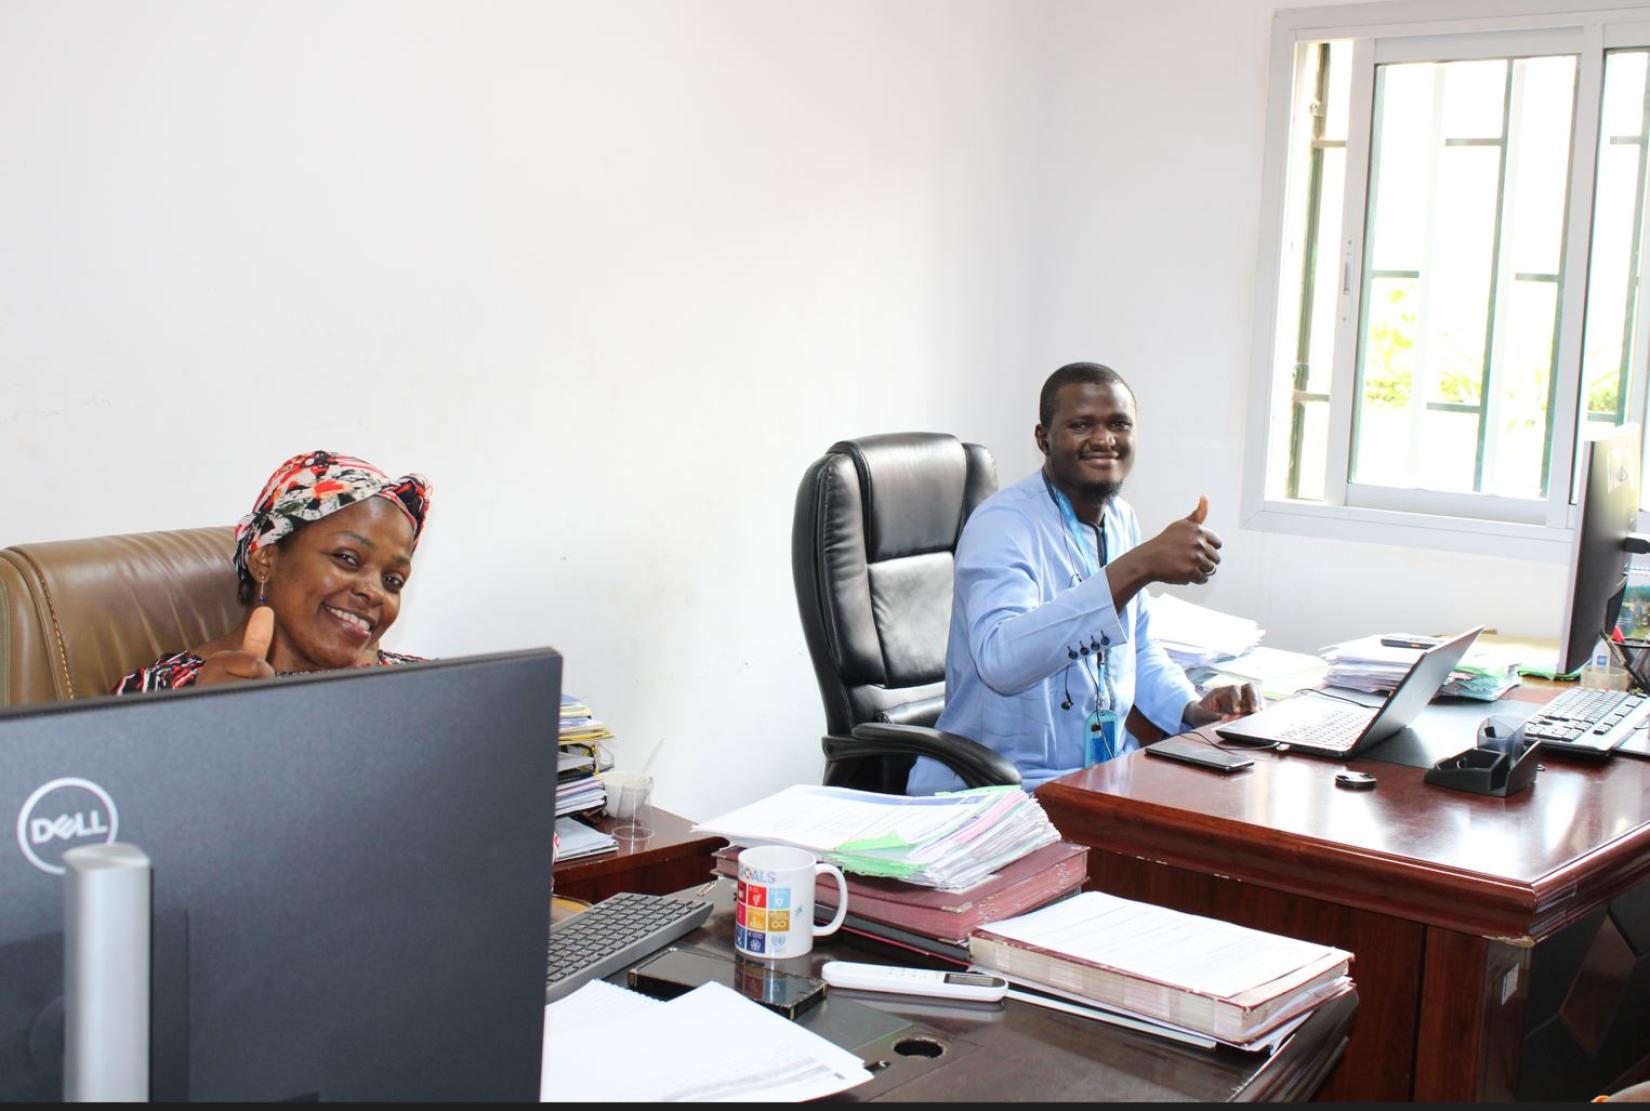 stable solar energy sparks happiness in project office staff, Sandrine and Amadou